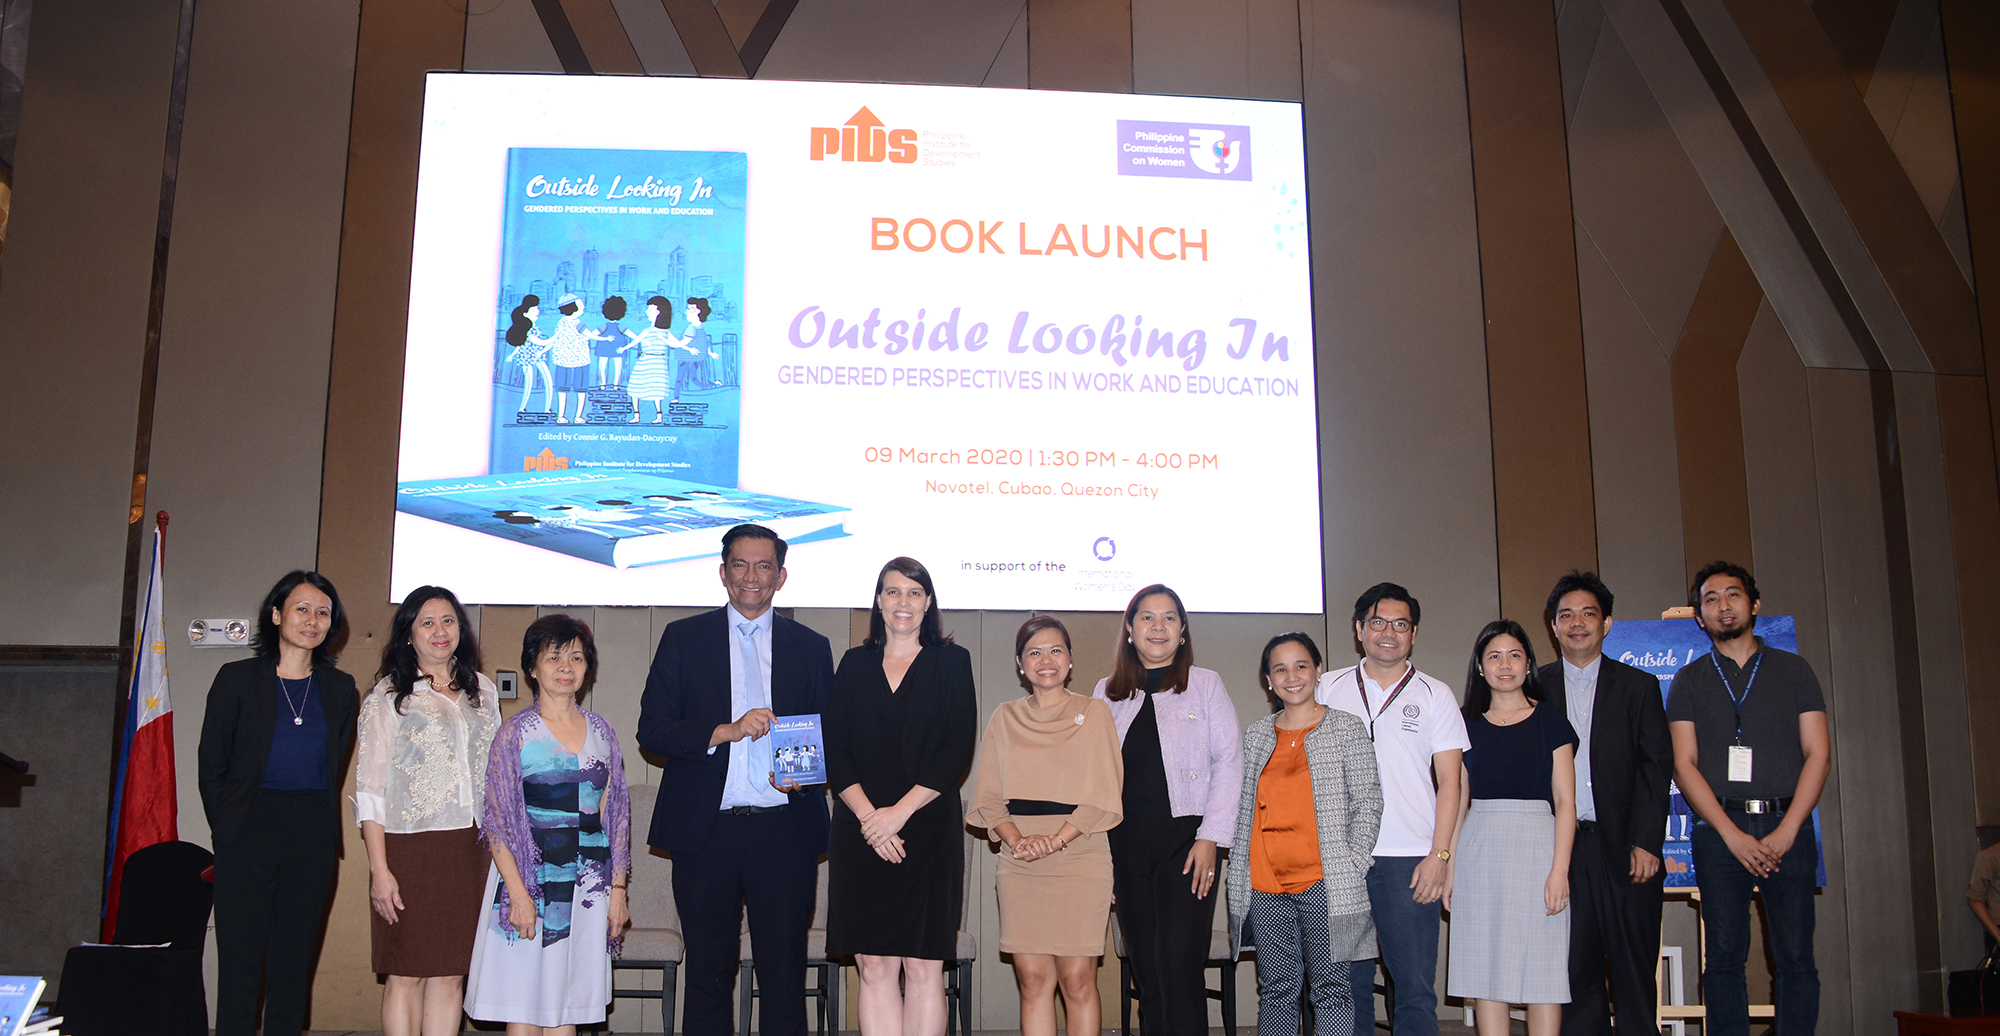 Book Launch: Outside Looking In: Gendered Perspectives in Work and Education-pids-gender-book-launch-1-20200309.jpg